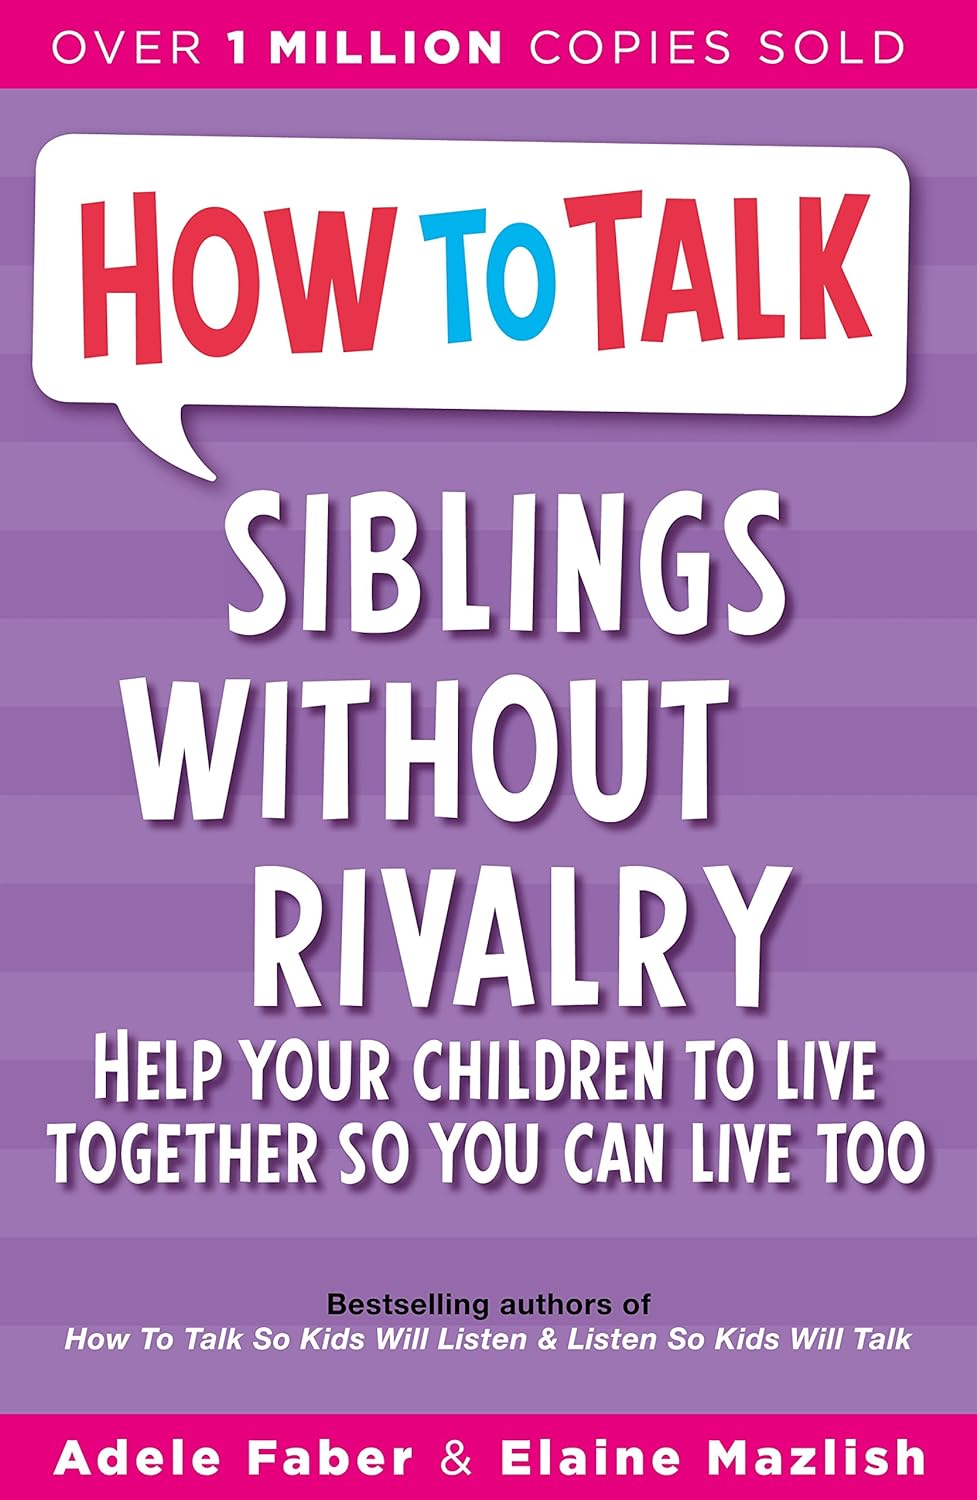 How To Talk: Siblings Without Rivalry